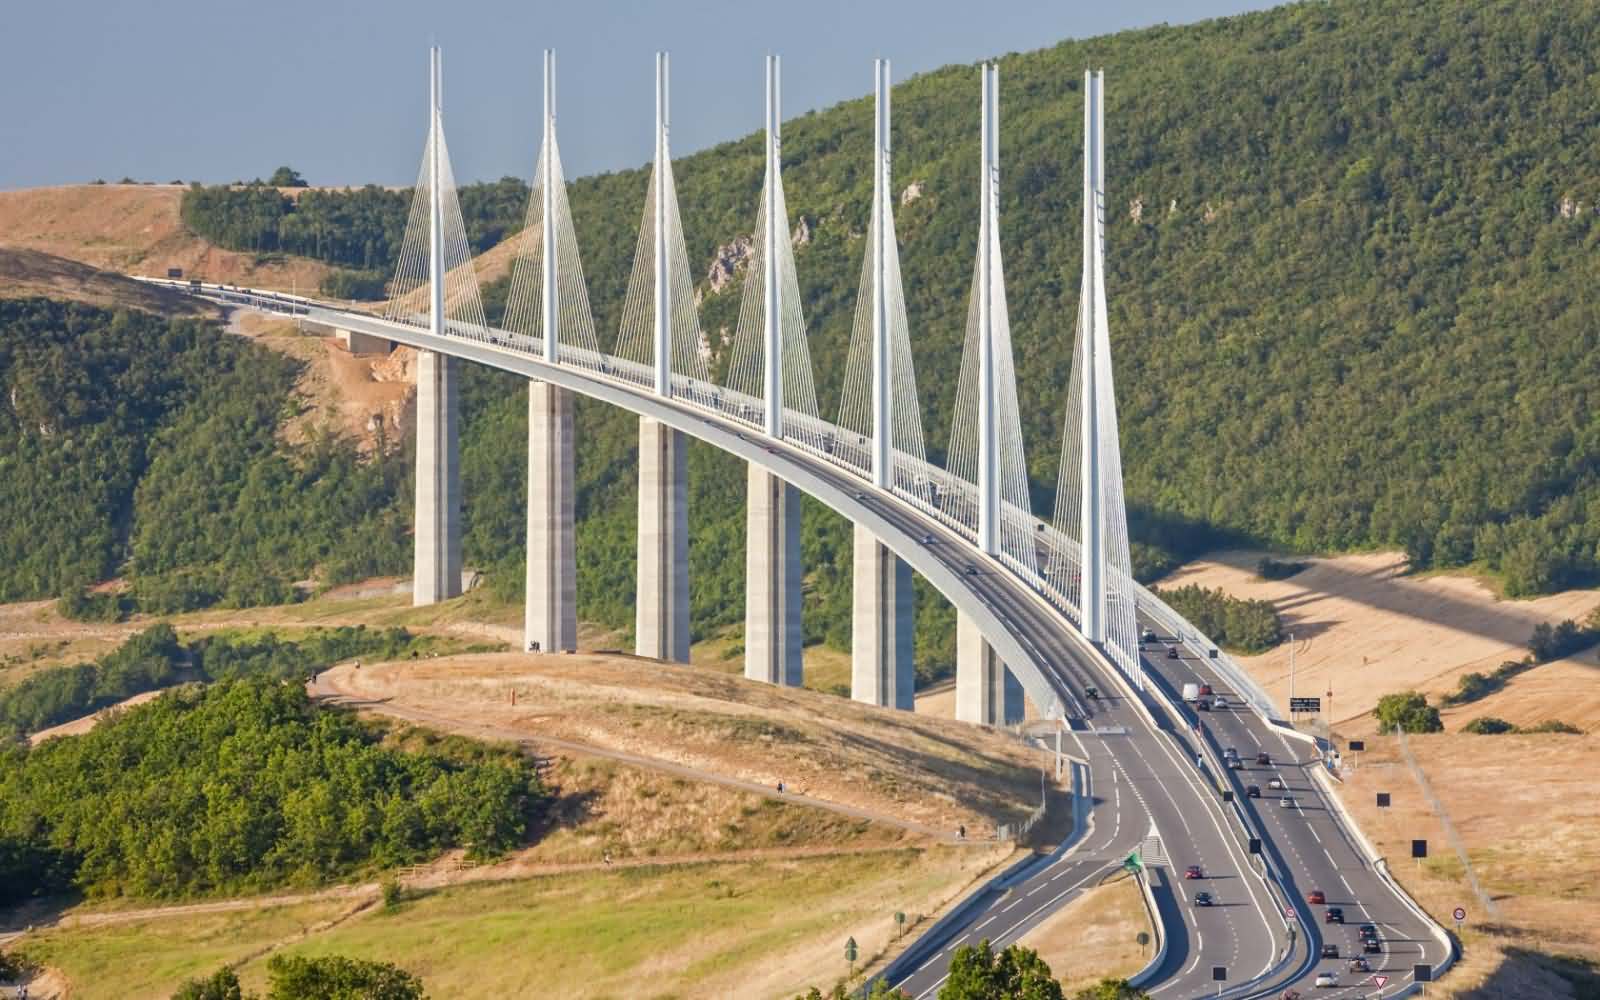 Traffic on the Millau Viaduct in france